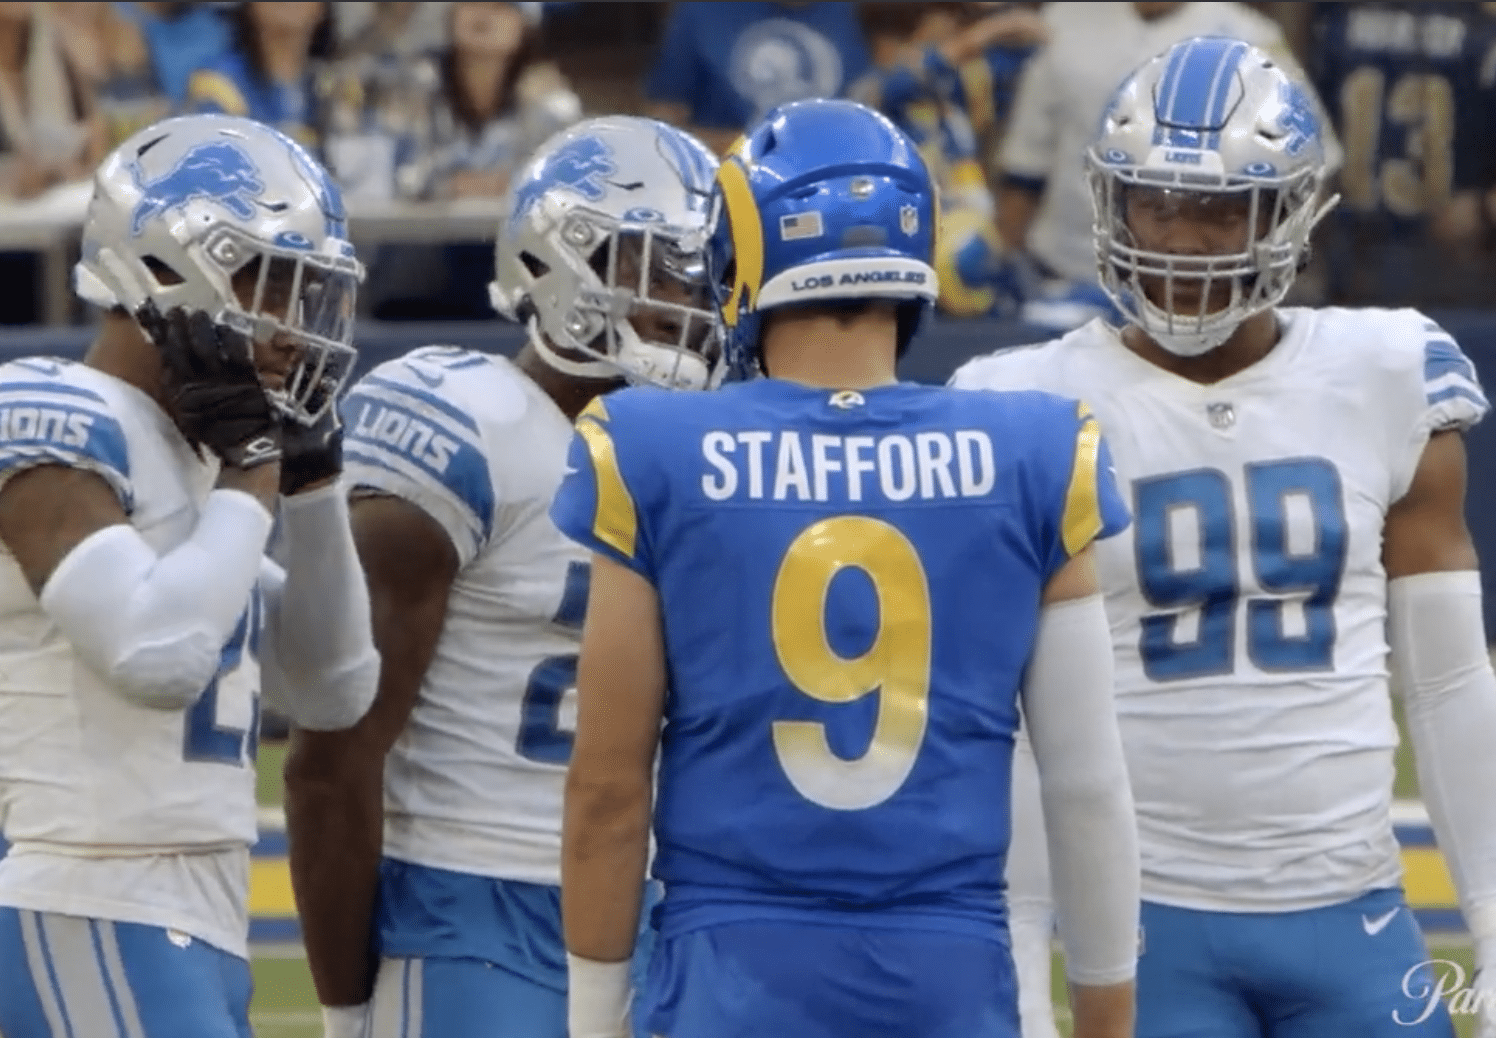 Matthew Stafford Los Angeles Rams Detroit Lions nearing Playoff collision with Matthew Stafford Matthew Stafford returning to Ford Field